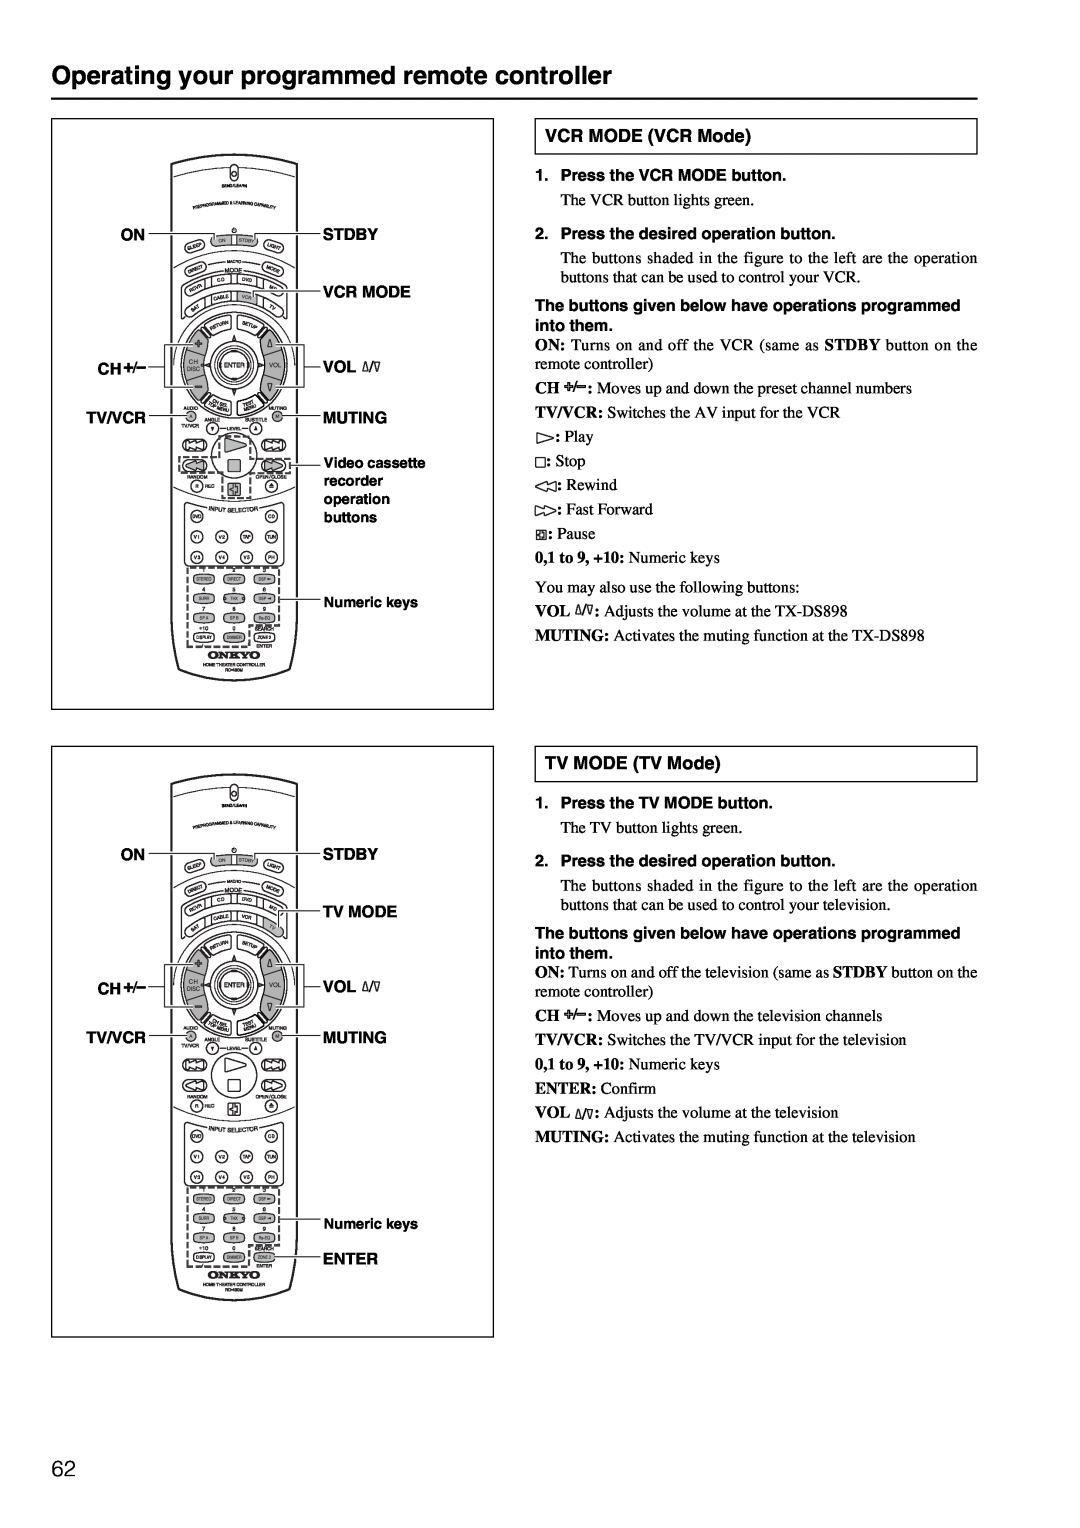 Onkyo TX-DS898 instruction manual Operating your programmed remote controller, VCR MODE VCR Mode, TV MODE TV Mode 